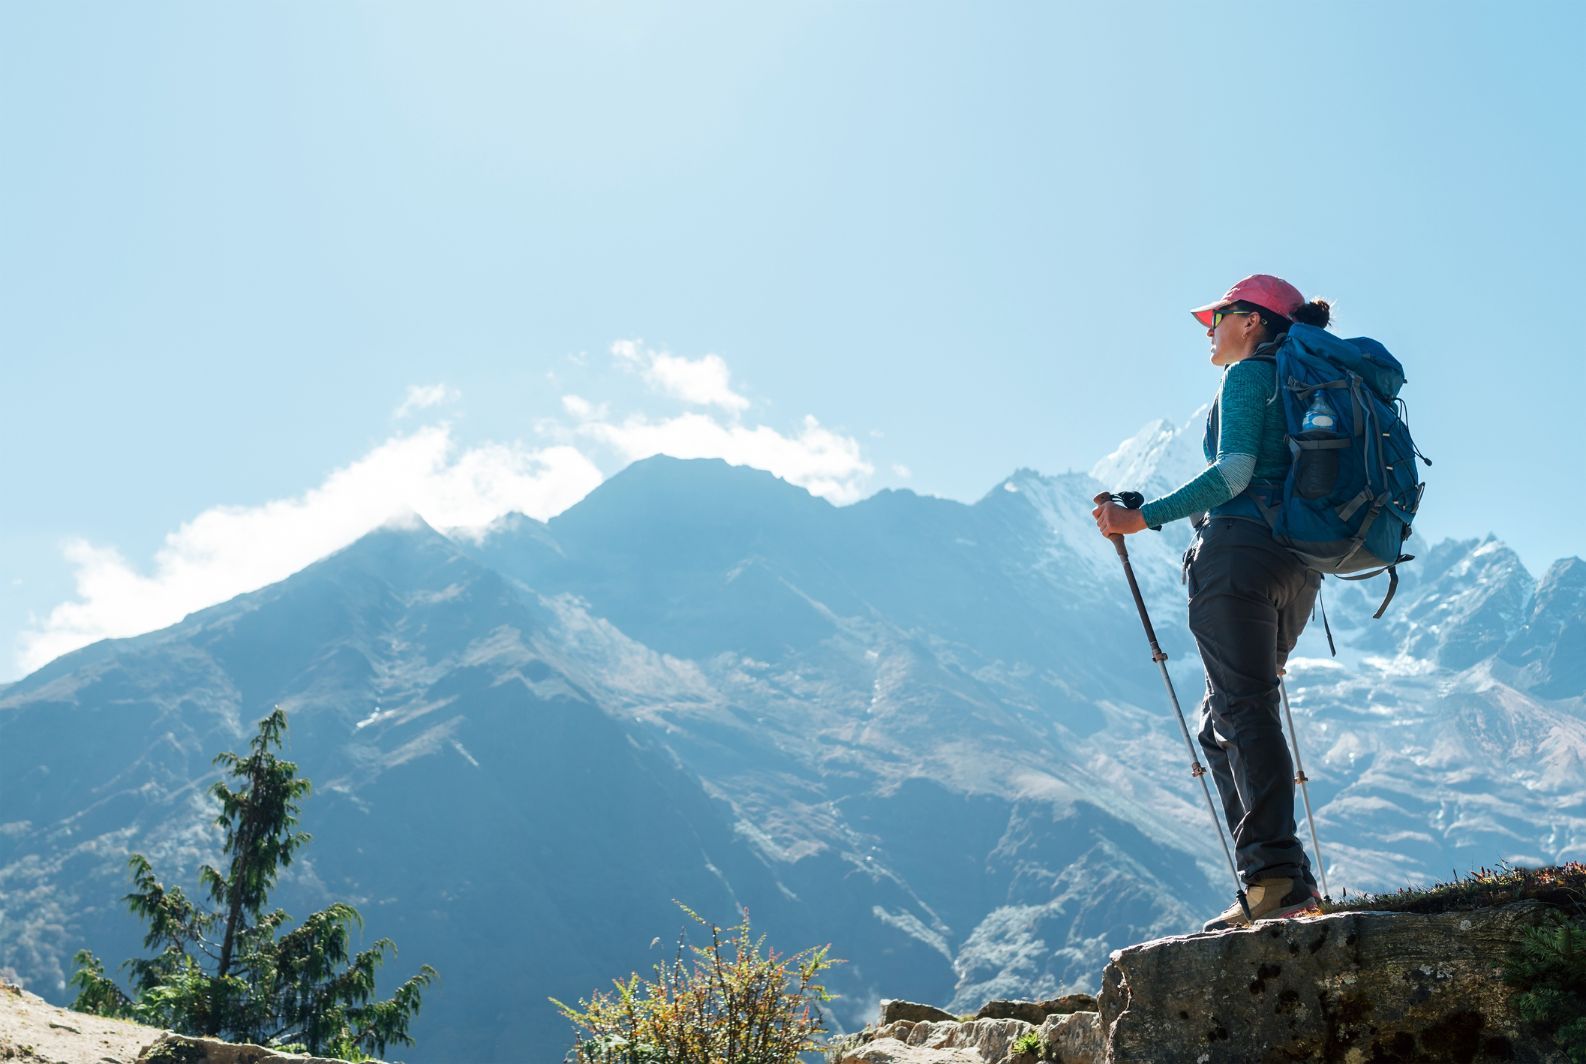 A women with trekking poles looks out over the mountainous landscape of Nepal